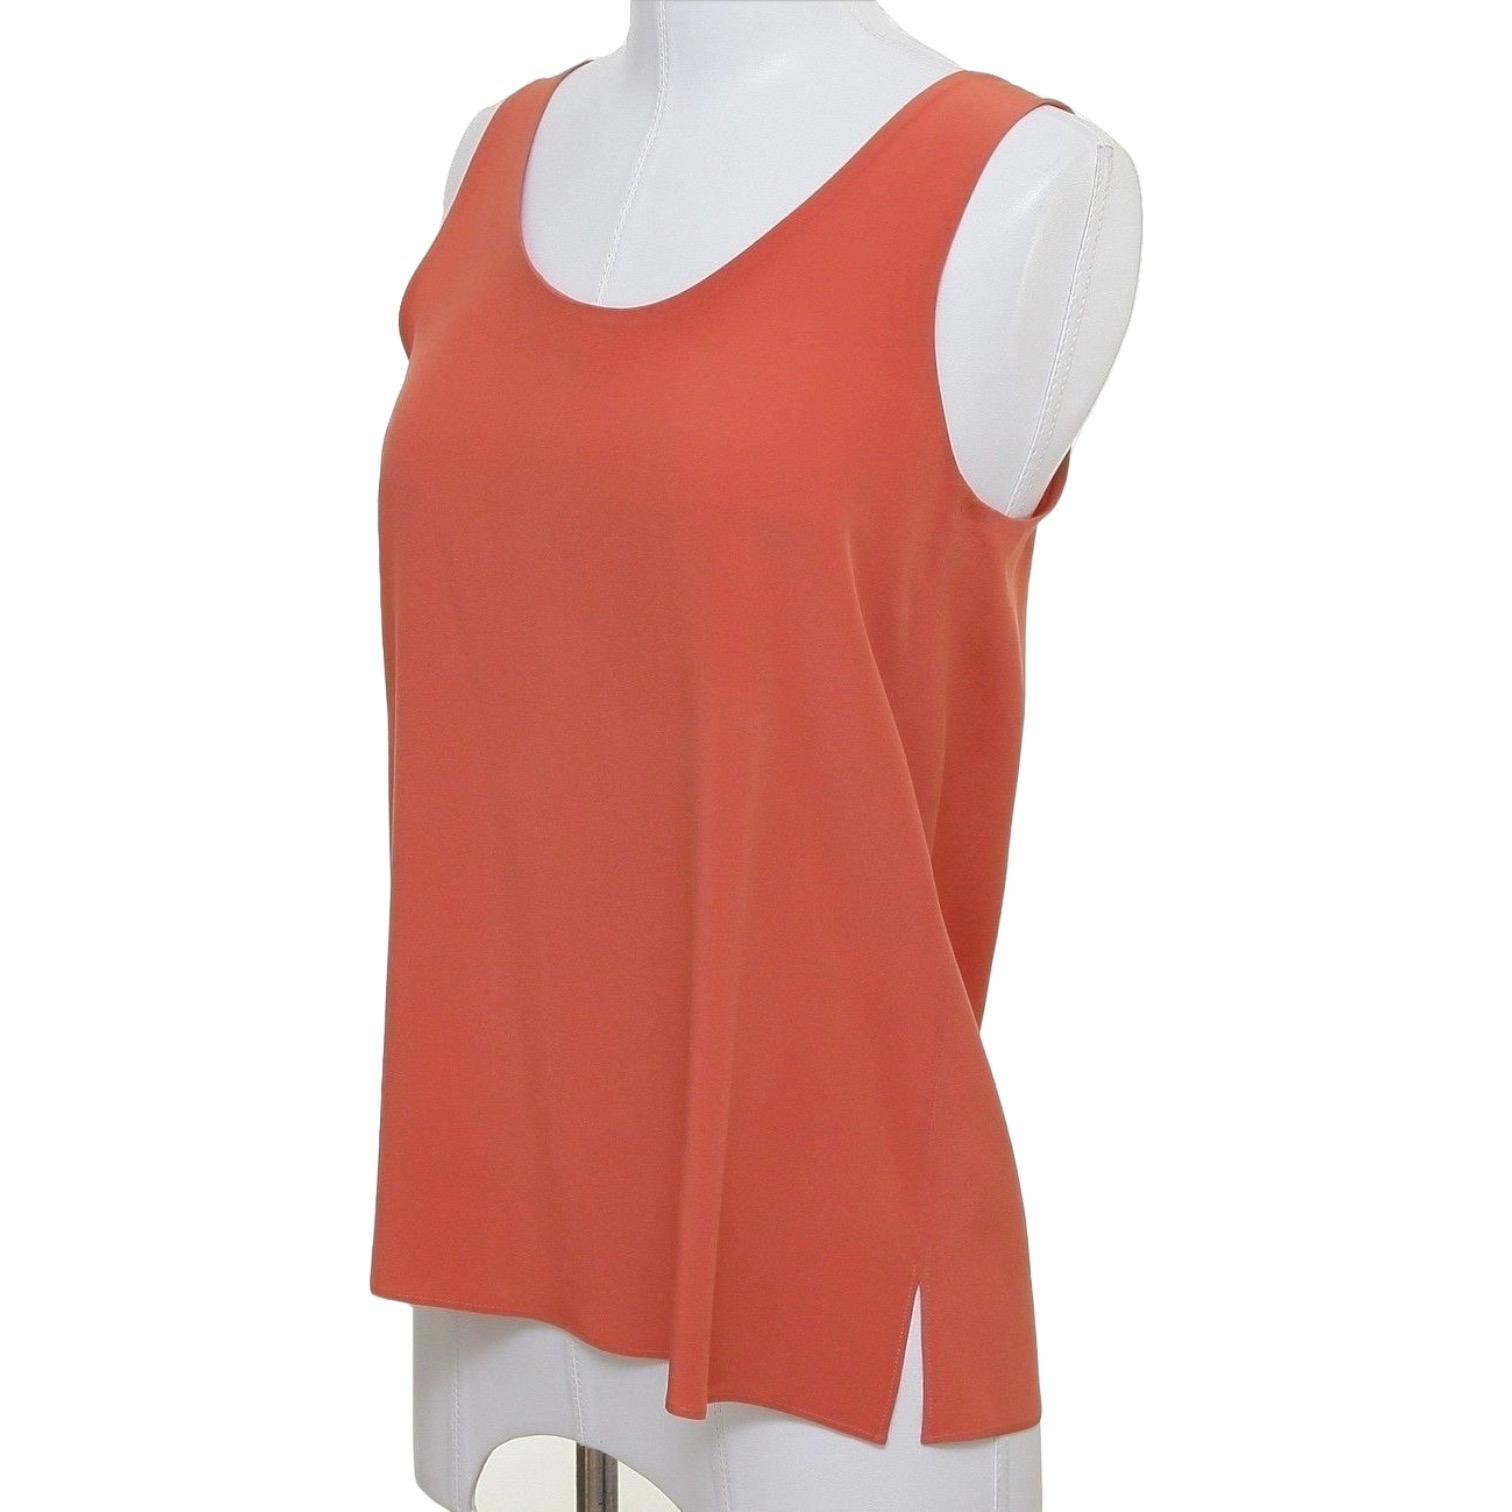 Chloe Orange Silk Sleeveless Blouse Top Dress Shirt 34 12S In Excellent Condition For Sale In Hollywood, FL